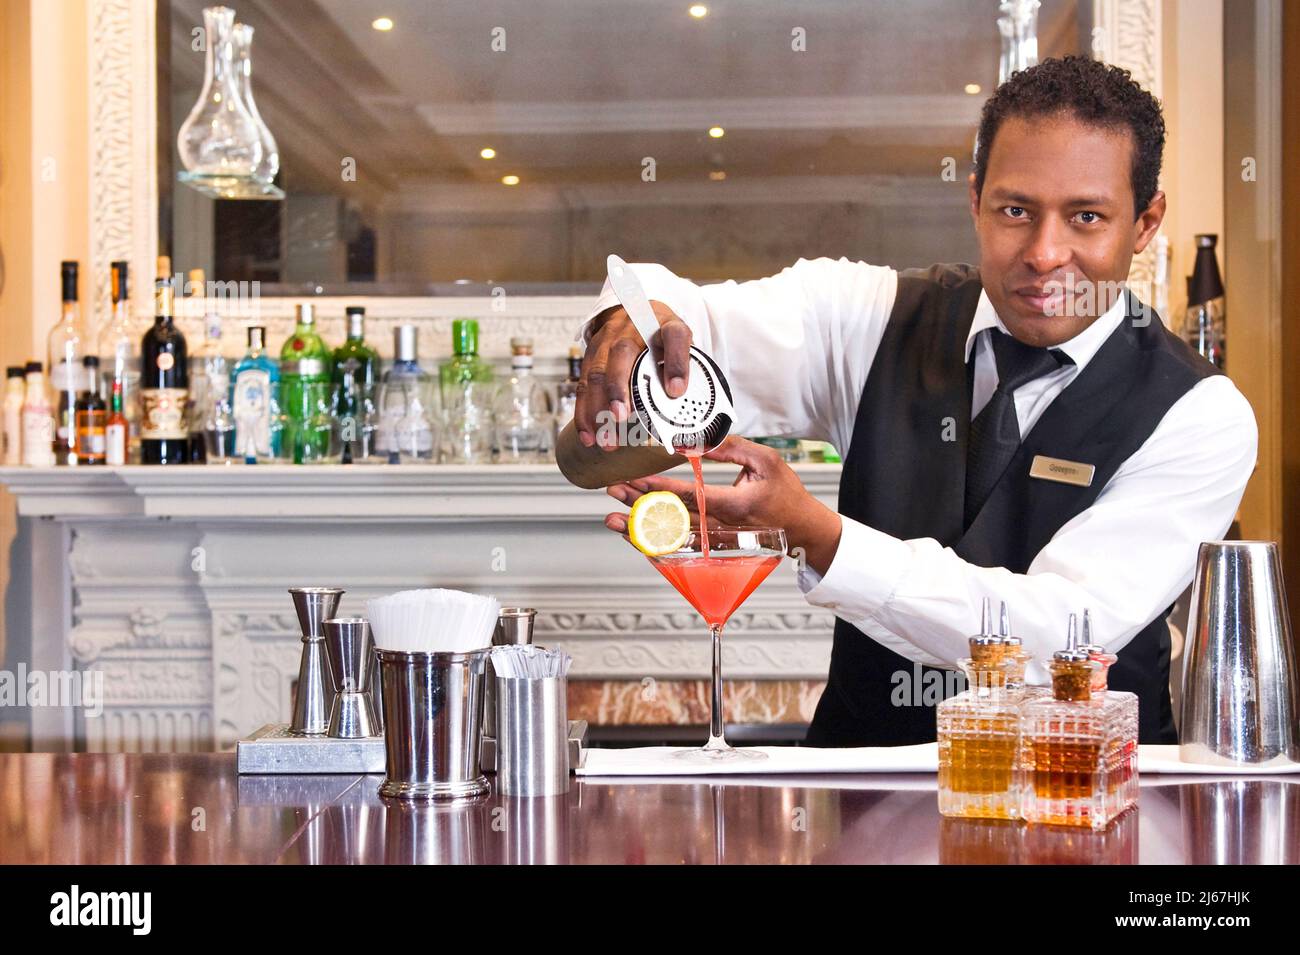 Bartender pouring a drink at a bar counter of a luxury hotel Stock Photo